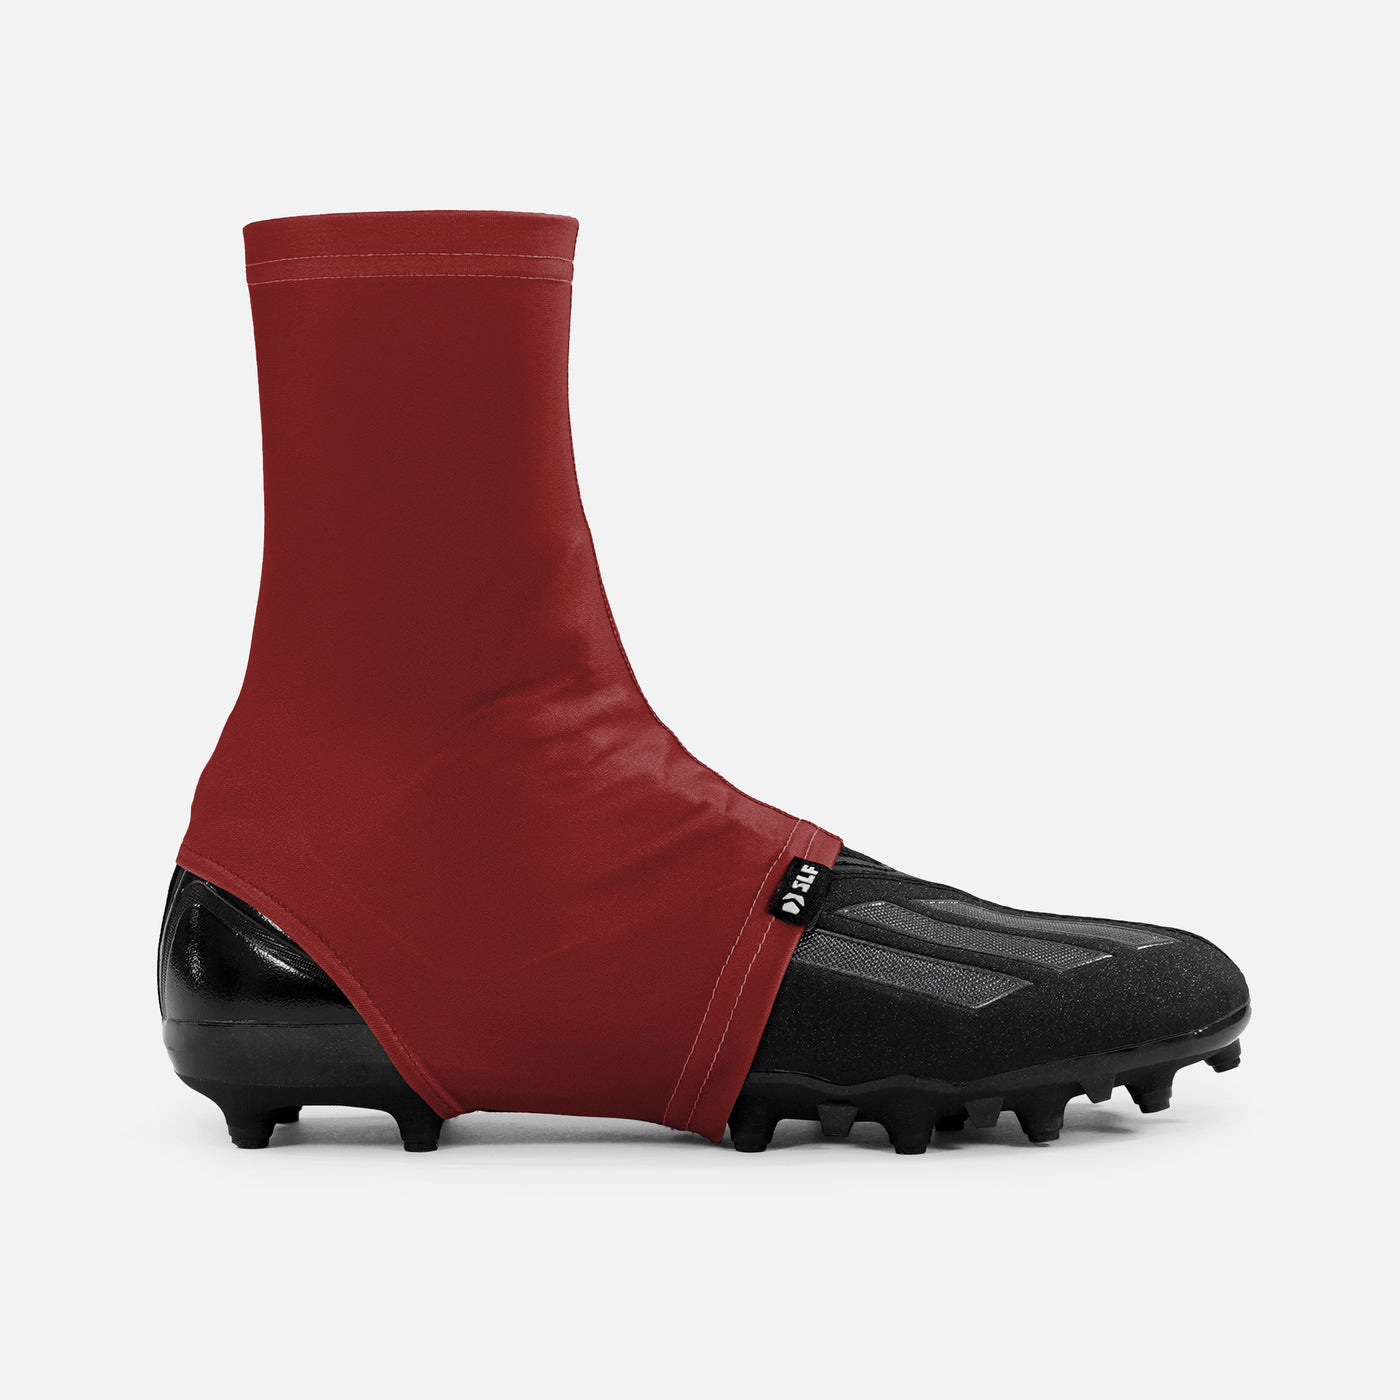 Hue Maroon Spats / Cleat Covers